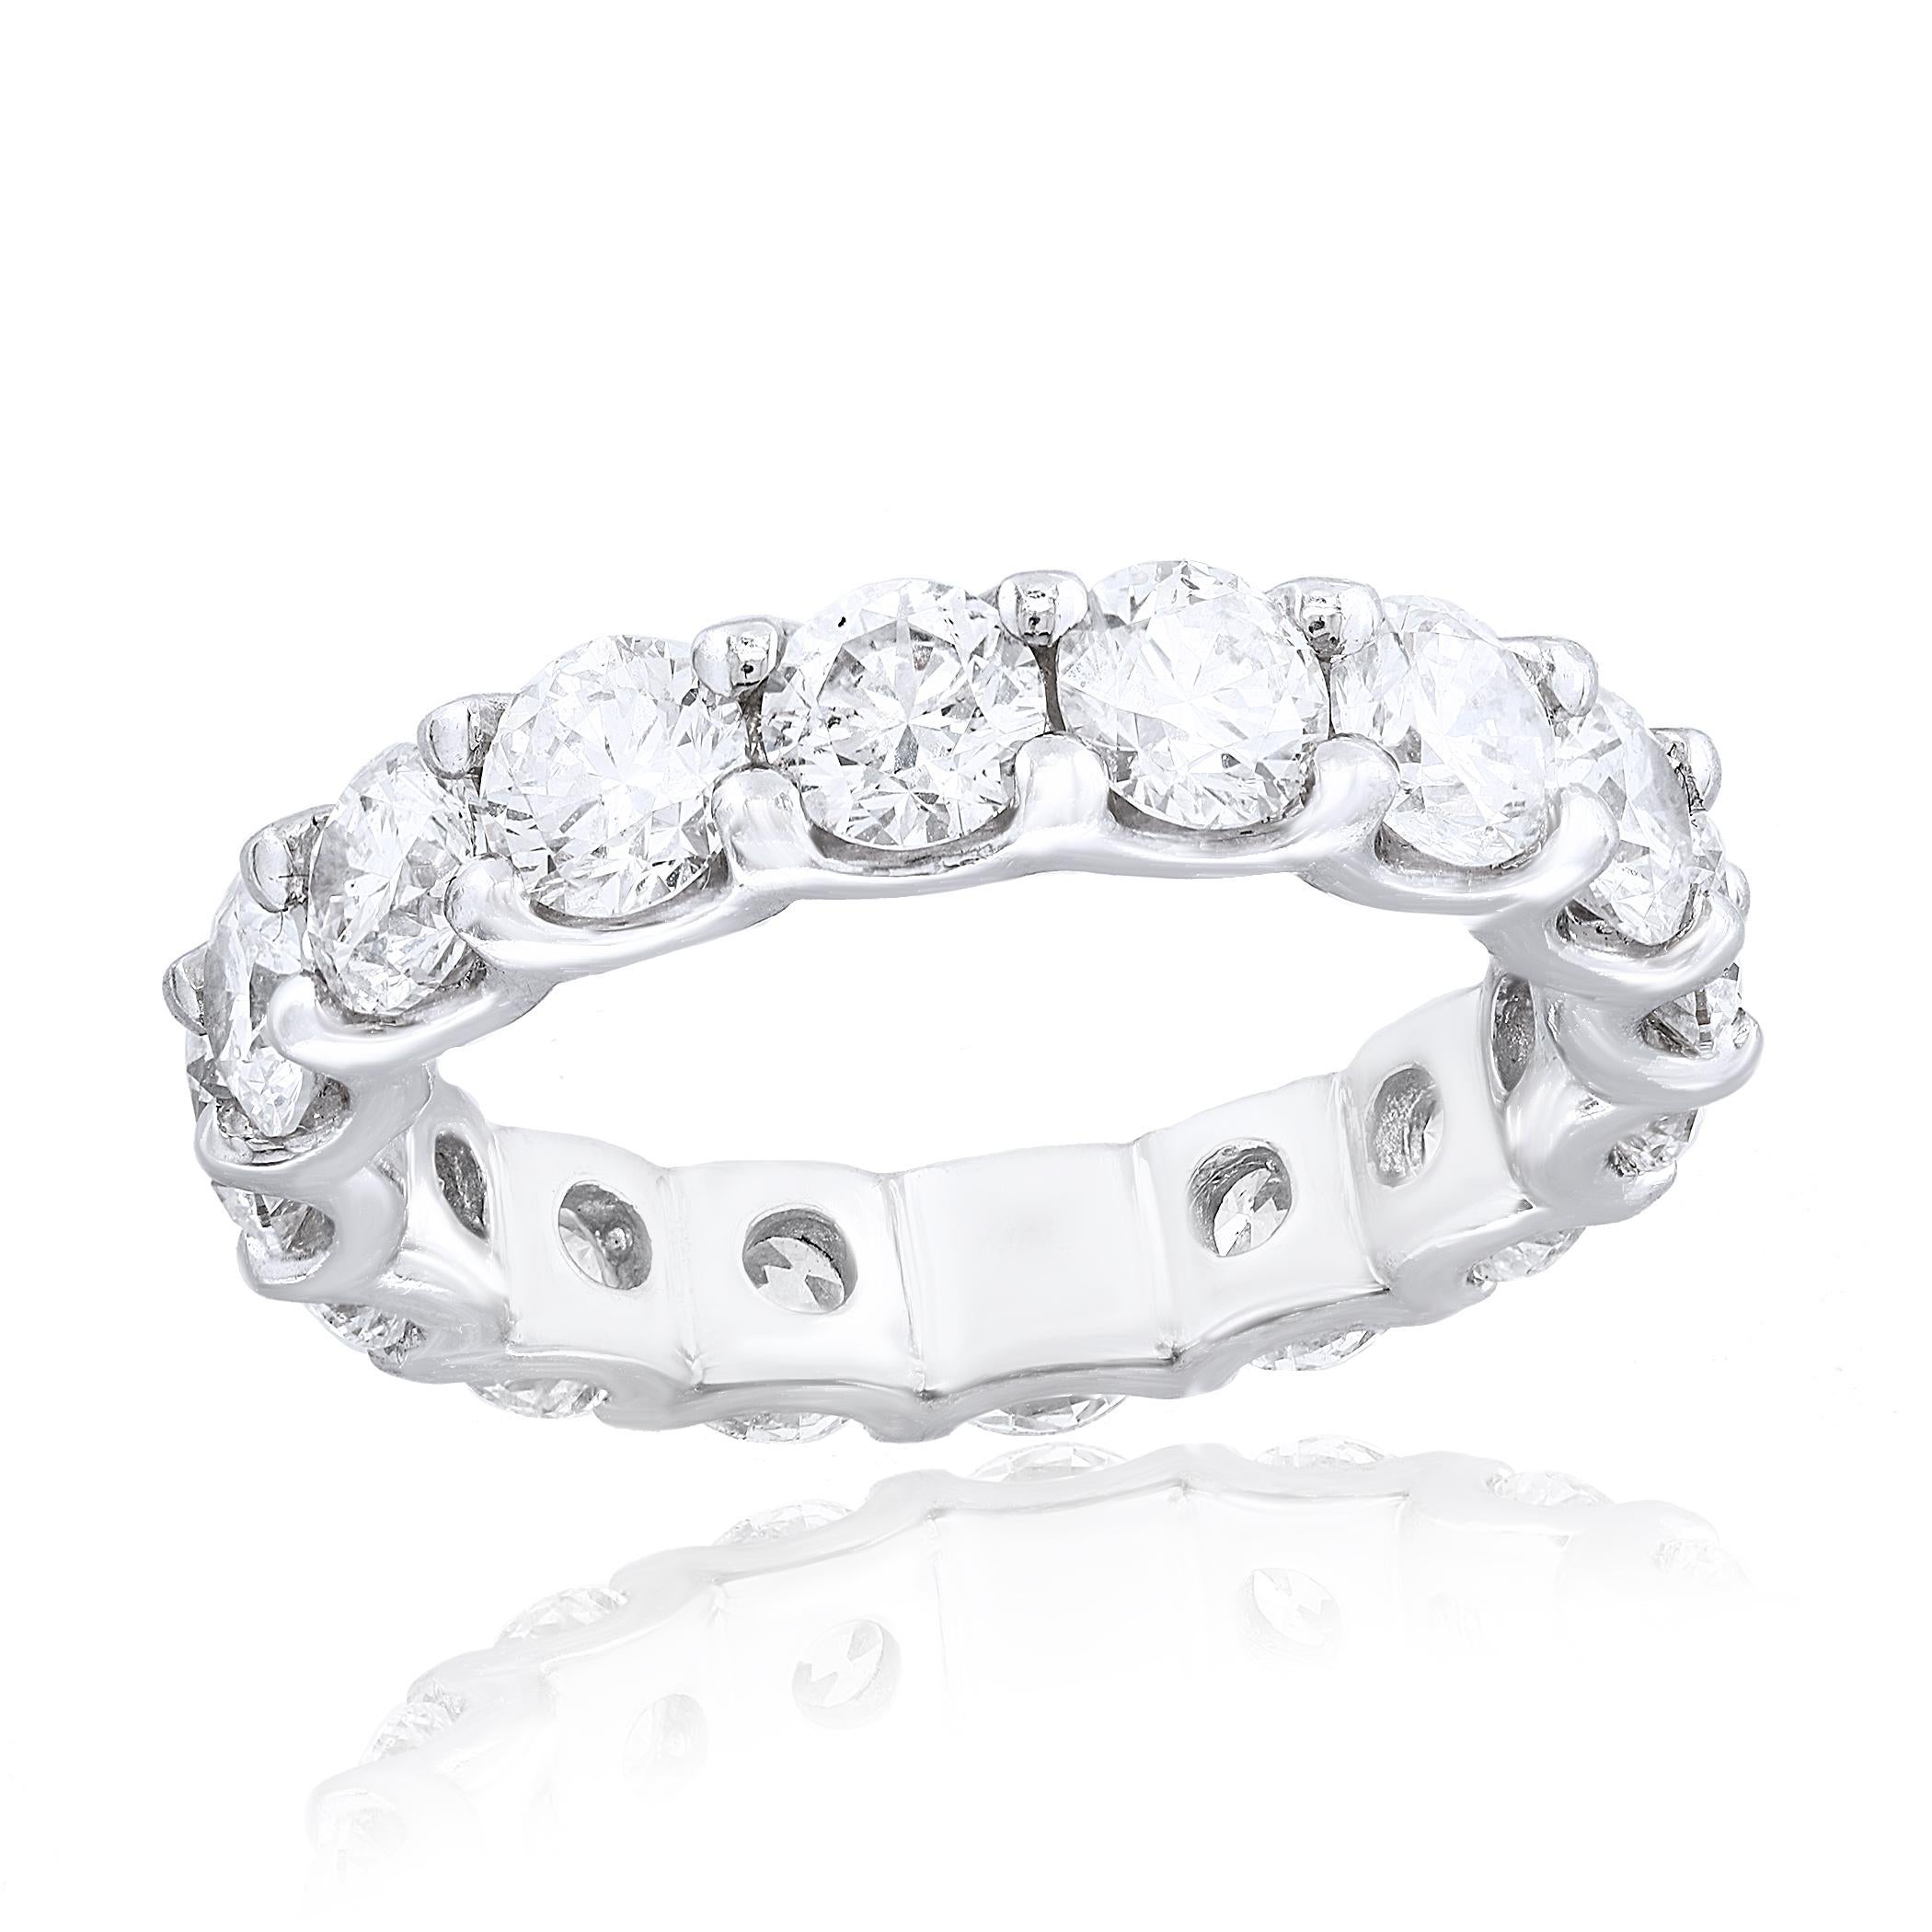 A classic and timeless eternity band style showcasing a row of round brilliant diamonds set in a shared-prong 14k white gold mounting. Diamonds weigh 4.02 carats.
Size 6.5 US (Sizable). One of a Kind  piece.
All diamonds are GH color SI1